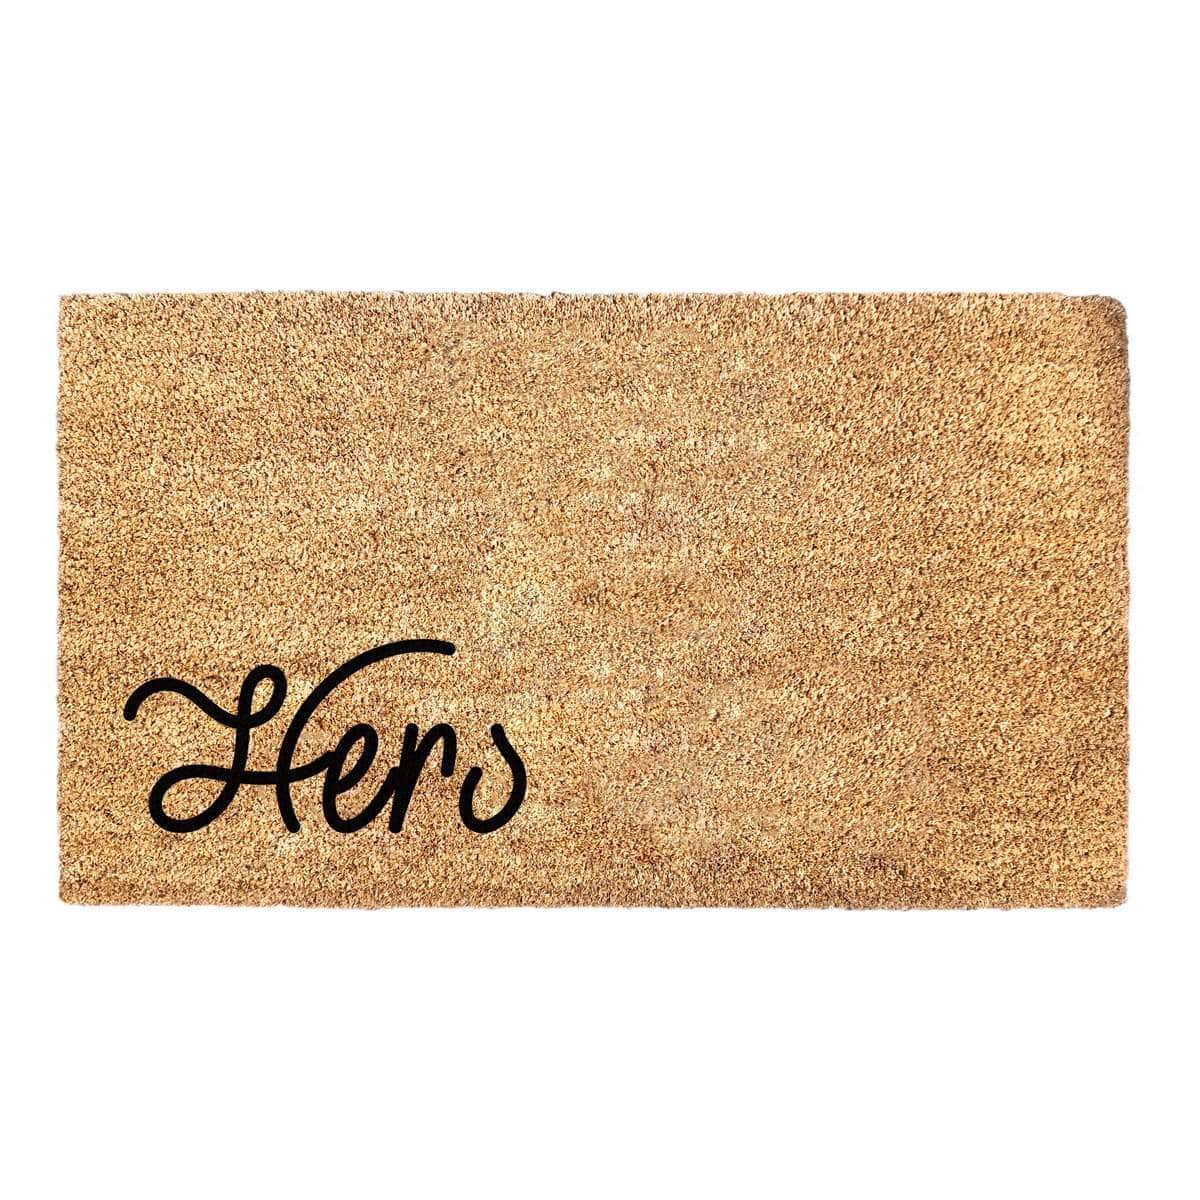 Hers Couples Doormat (Part of His and Hers Collection. "His" sold separately) - Housewarming Gift